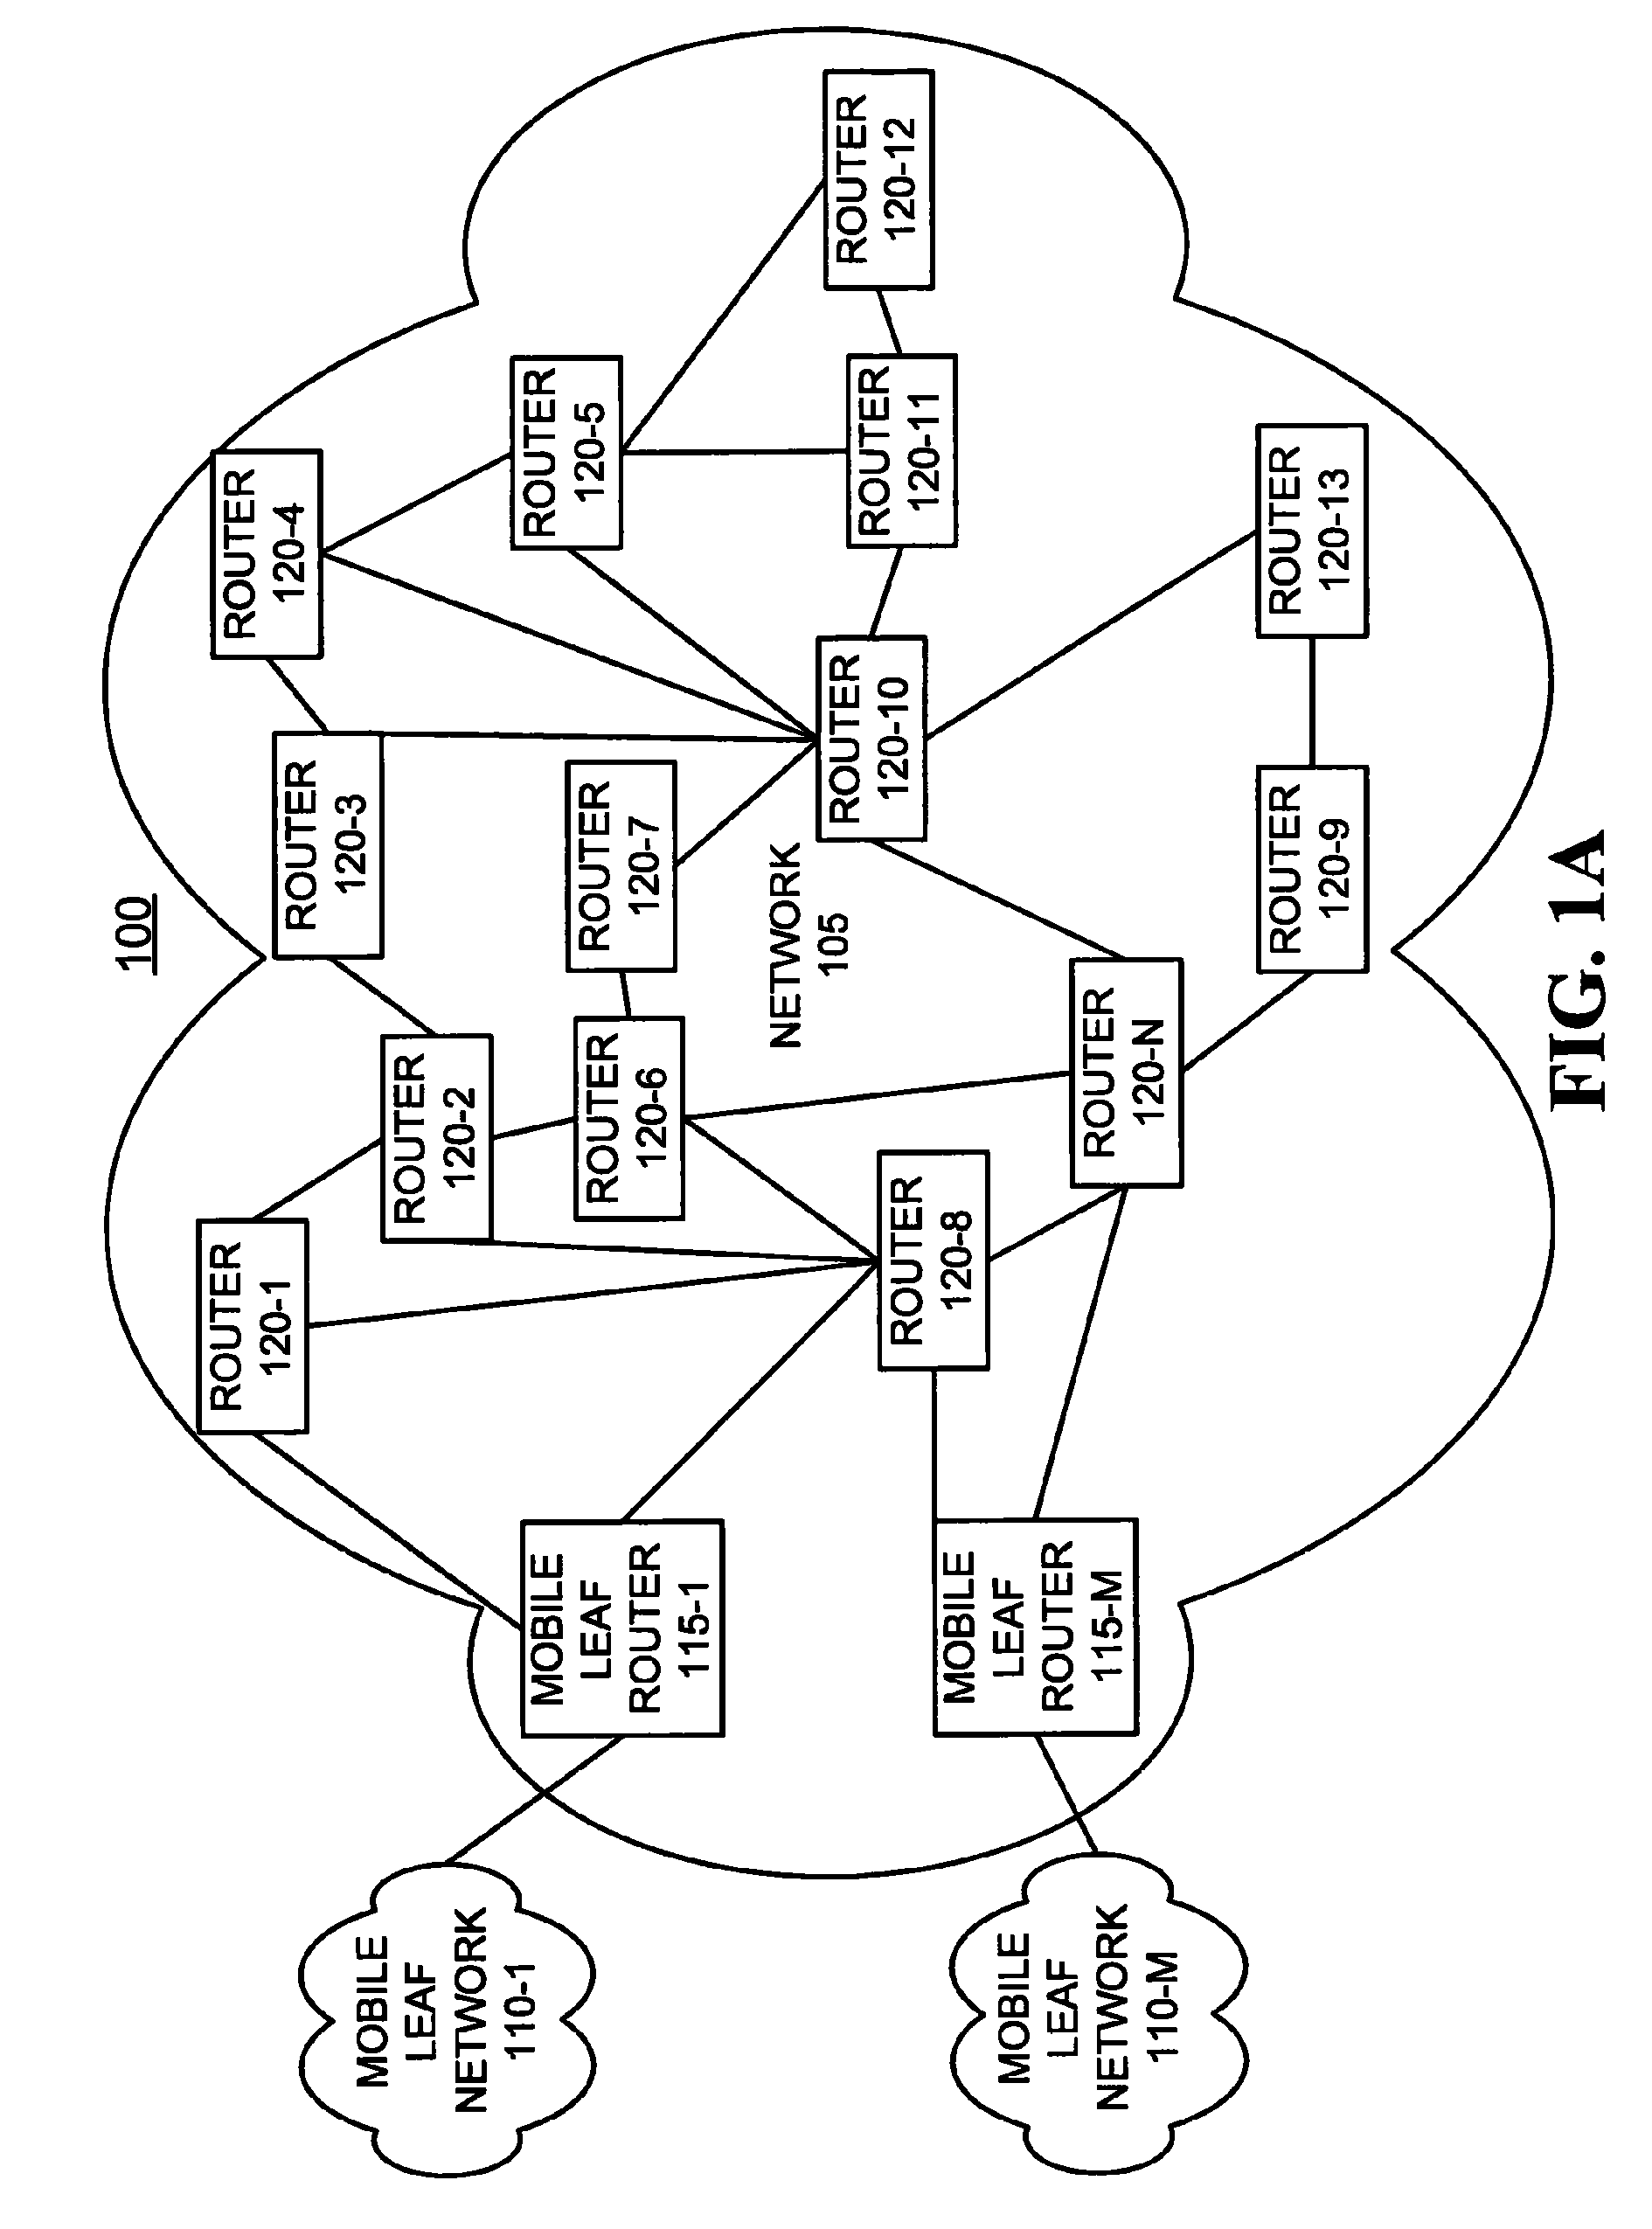 Systems and methods for constructing a virtual model of a multi-hop, multi-access network